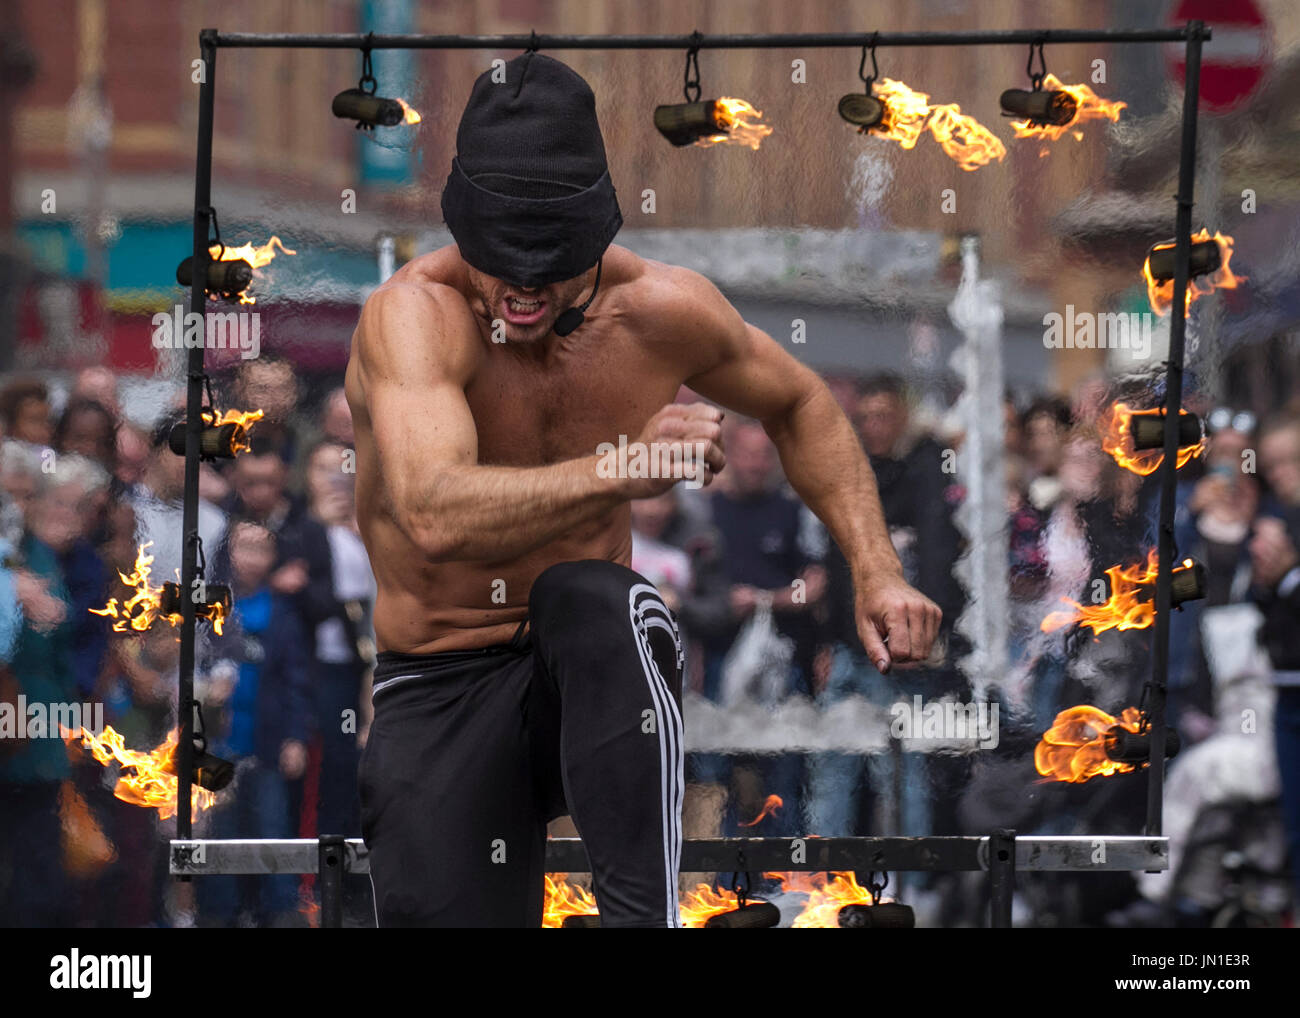 Blackpool, Lancashire, UK. UK Weather. 29th July, 2017. Liam an 'Olympic athlete known as The Stunt Runner', performs a blindfolded, death defying stunt for crowds in the resort. JUMPING over hurdles made of chainsaws and fire while blindfolded helped a Tynedale Harrier to the world title. Liam Collins, street entertainer, continues to raise funds for World Masters Athletics Indoor Championships, as a death-defying street performer up-and-down the country. MediaWorldImages/AlamyLiveNews Stock Photo